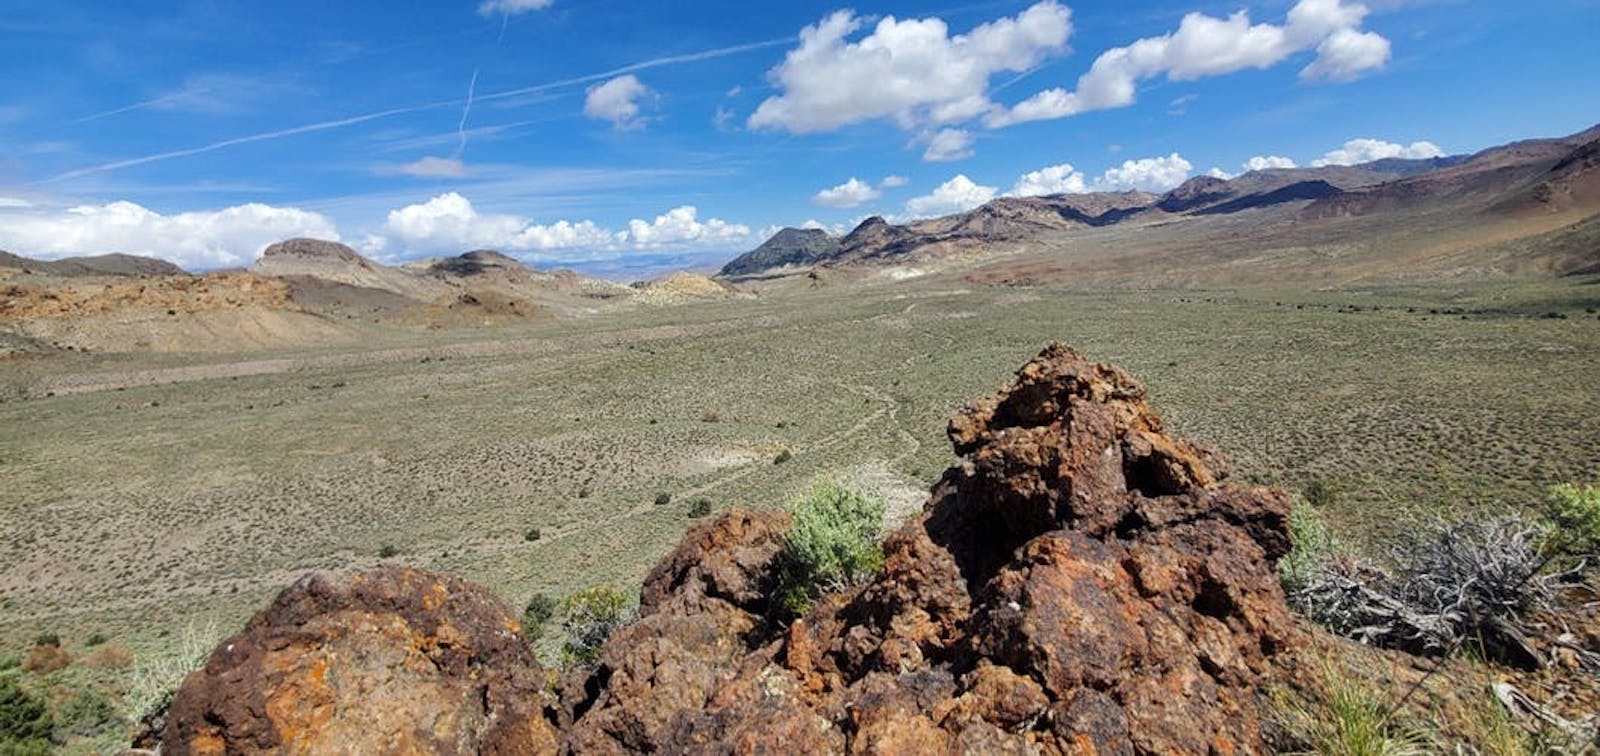 Site of the proposed Rhyolite Ridge lithium mine. Photo: Courtesy Ioneer